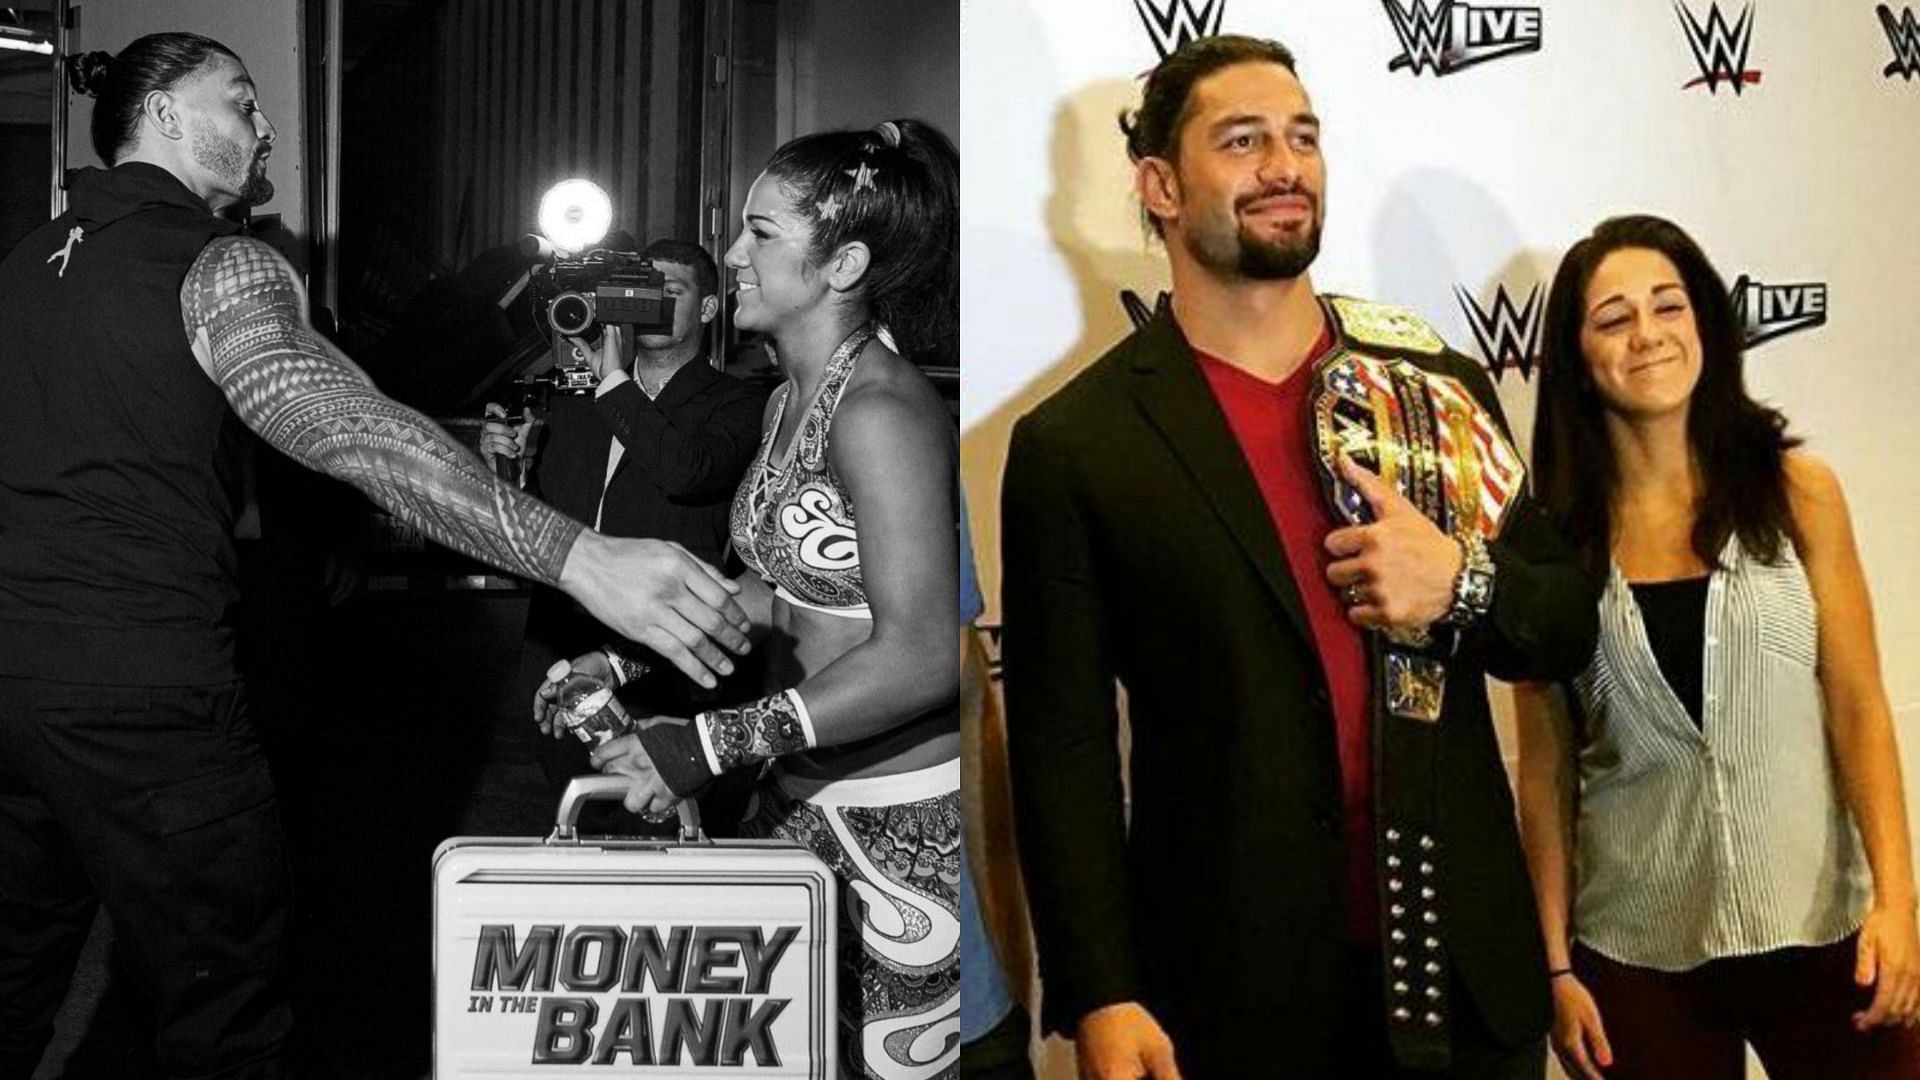 Bayley and Roman Reigns seemingly have a good relationship